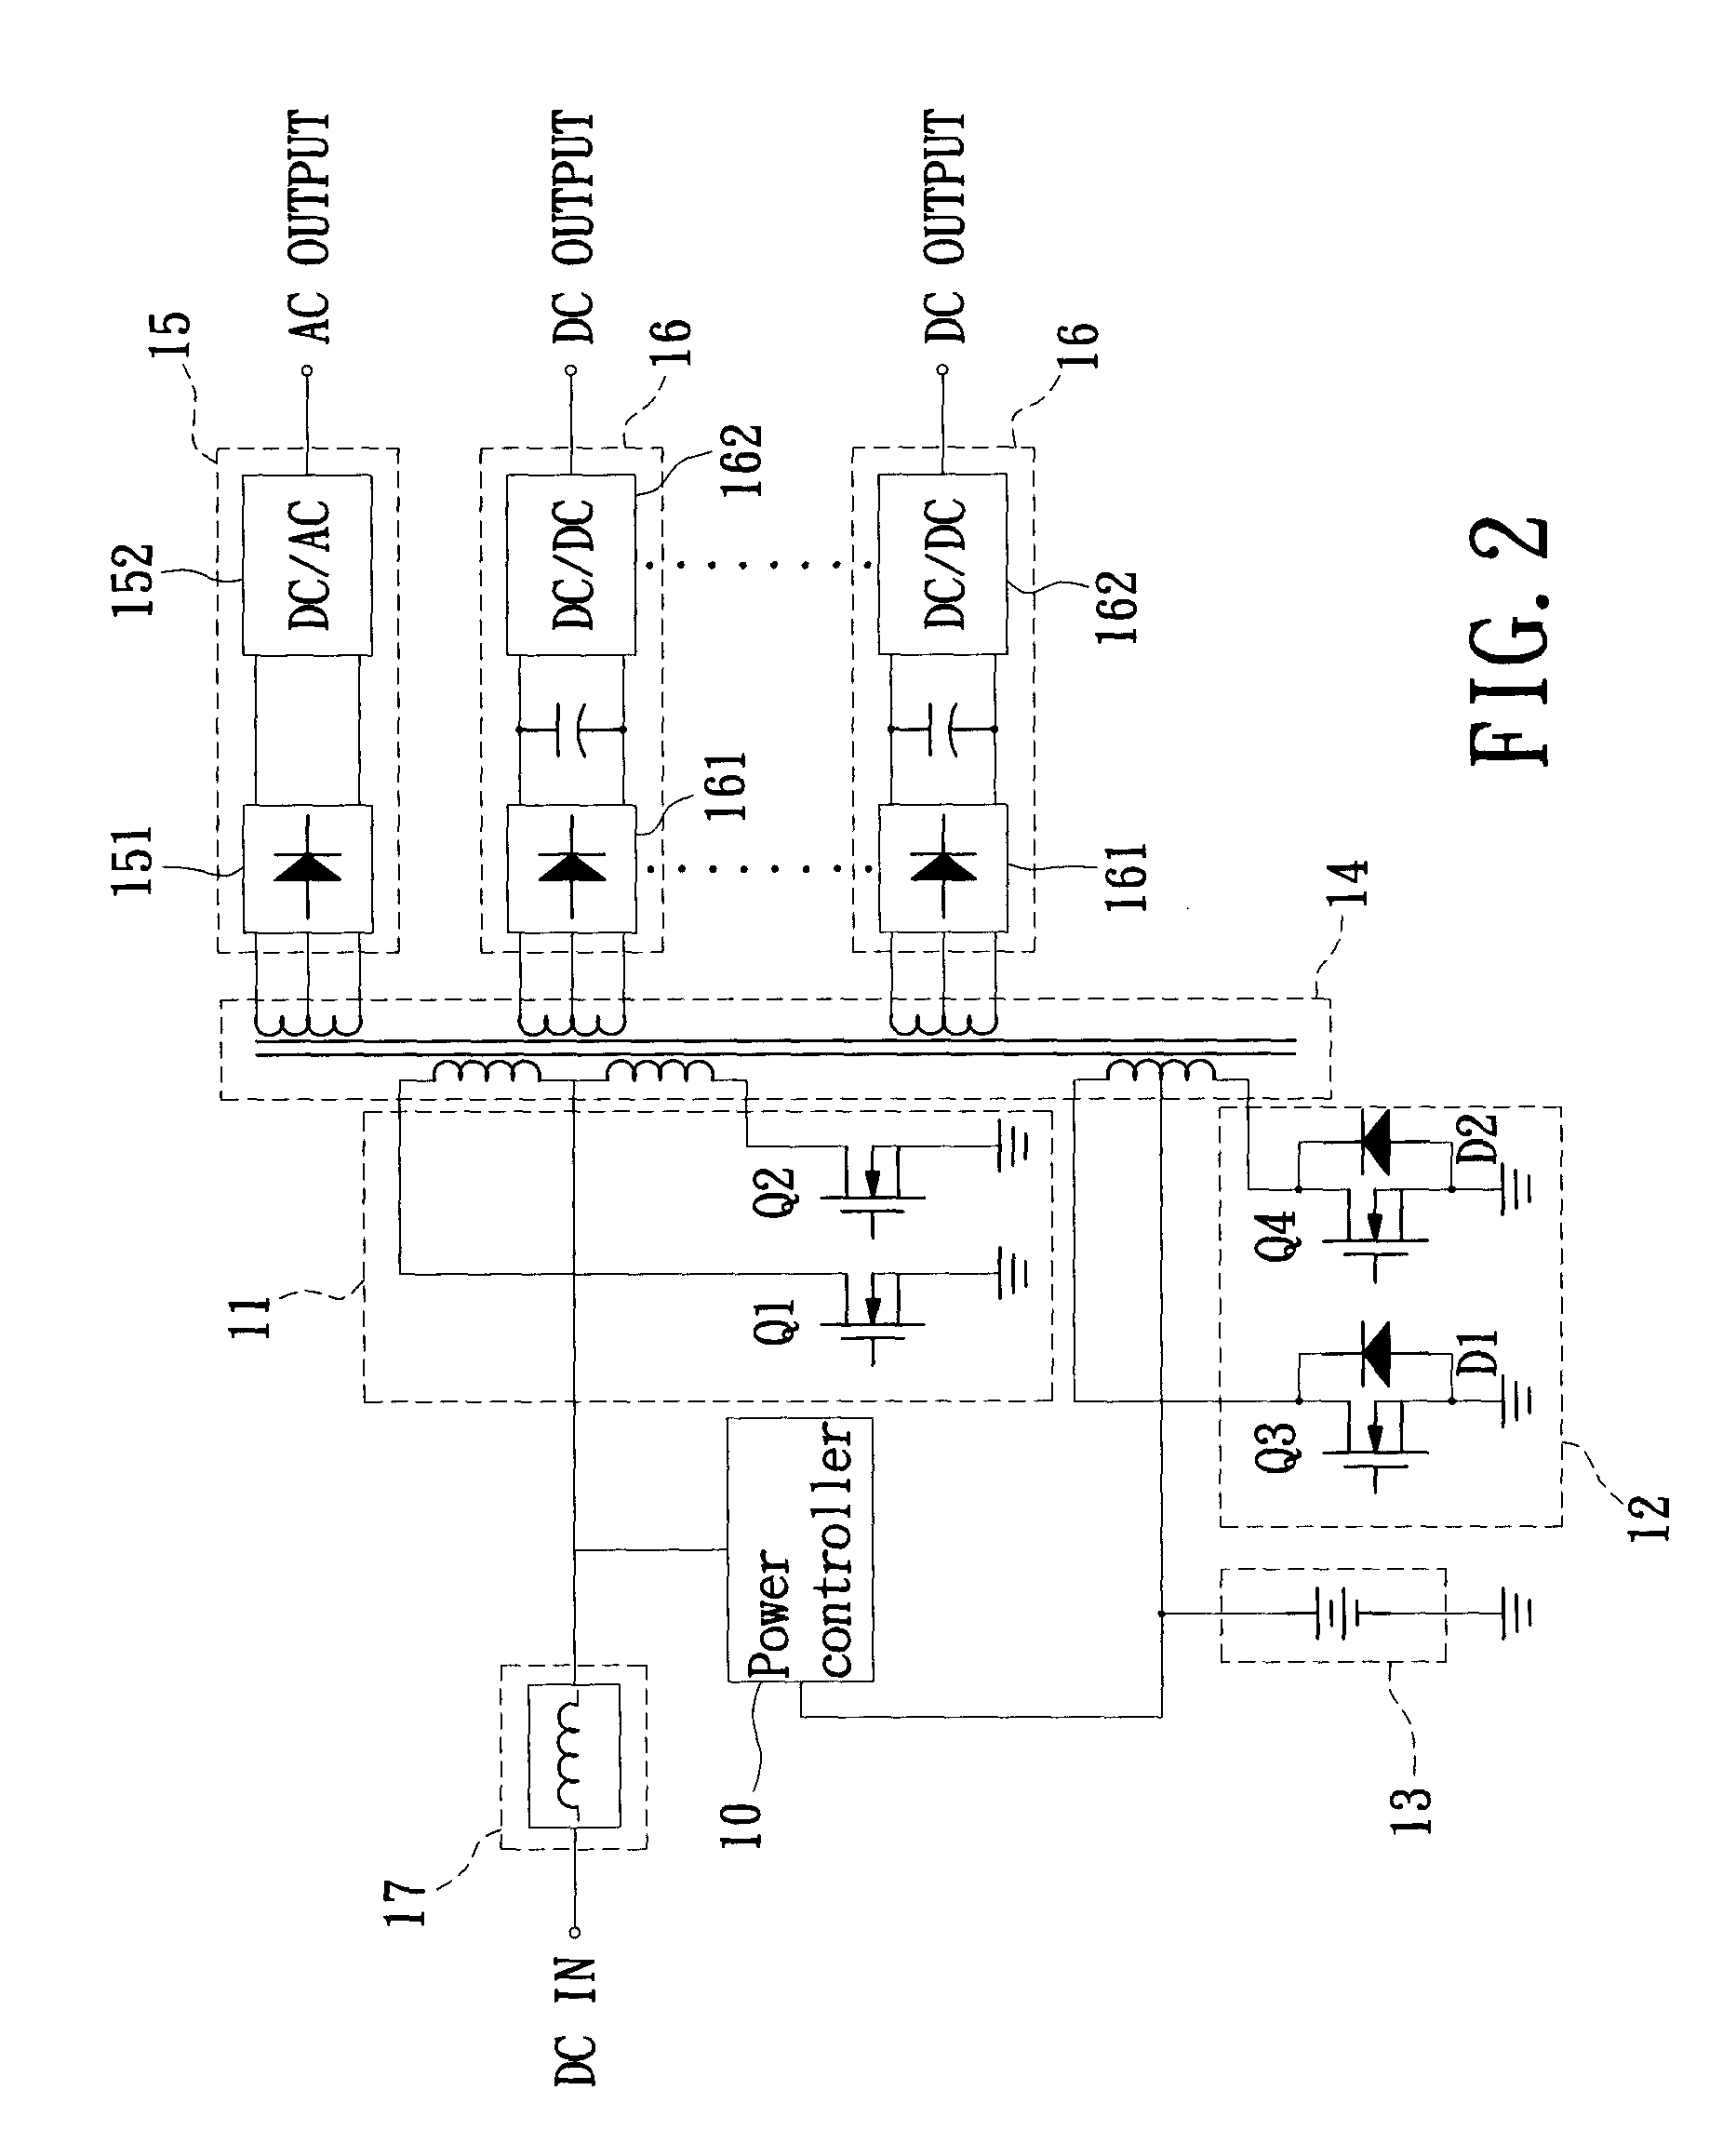 On-vehicle power supply device